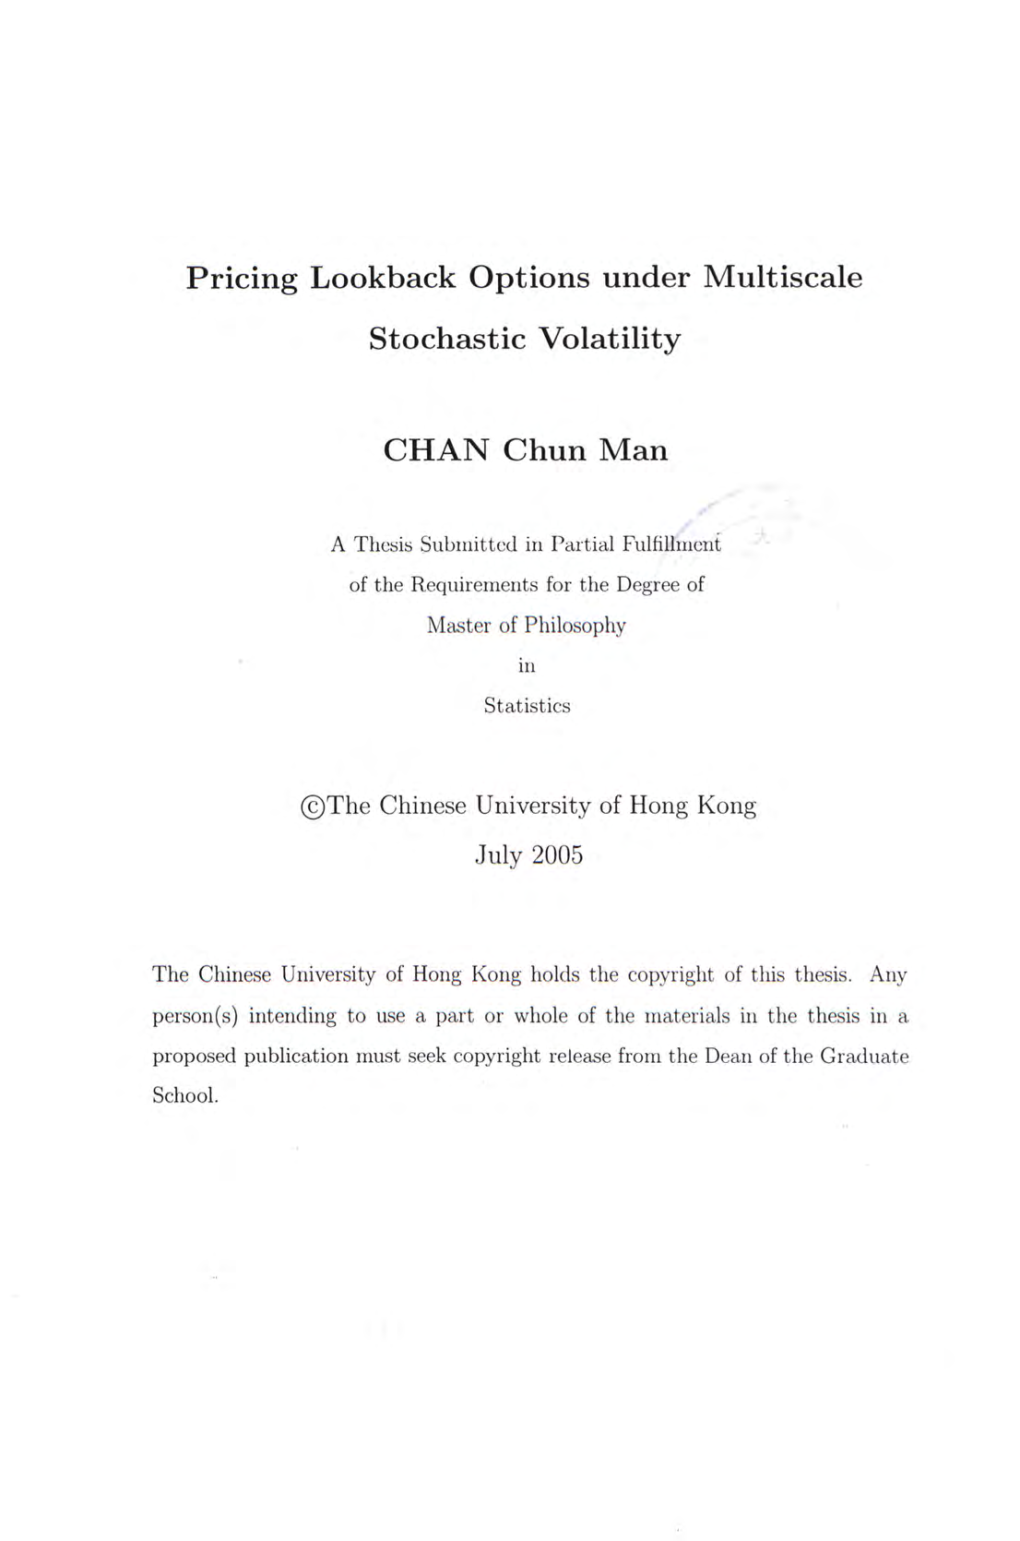 Pricing Lookback Options Under Multiscale Stochastic Volatility